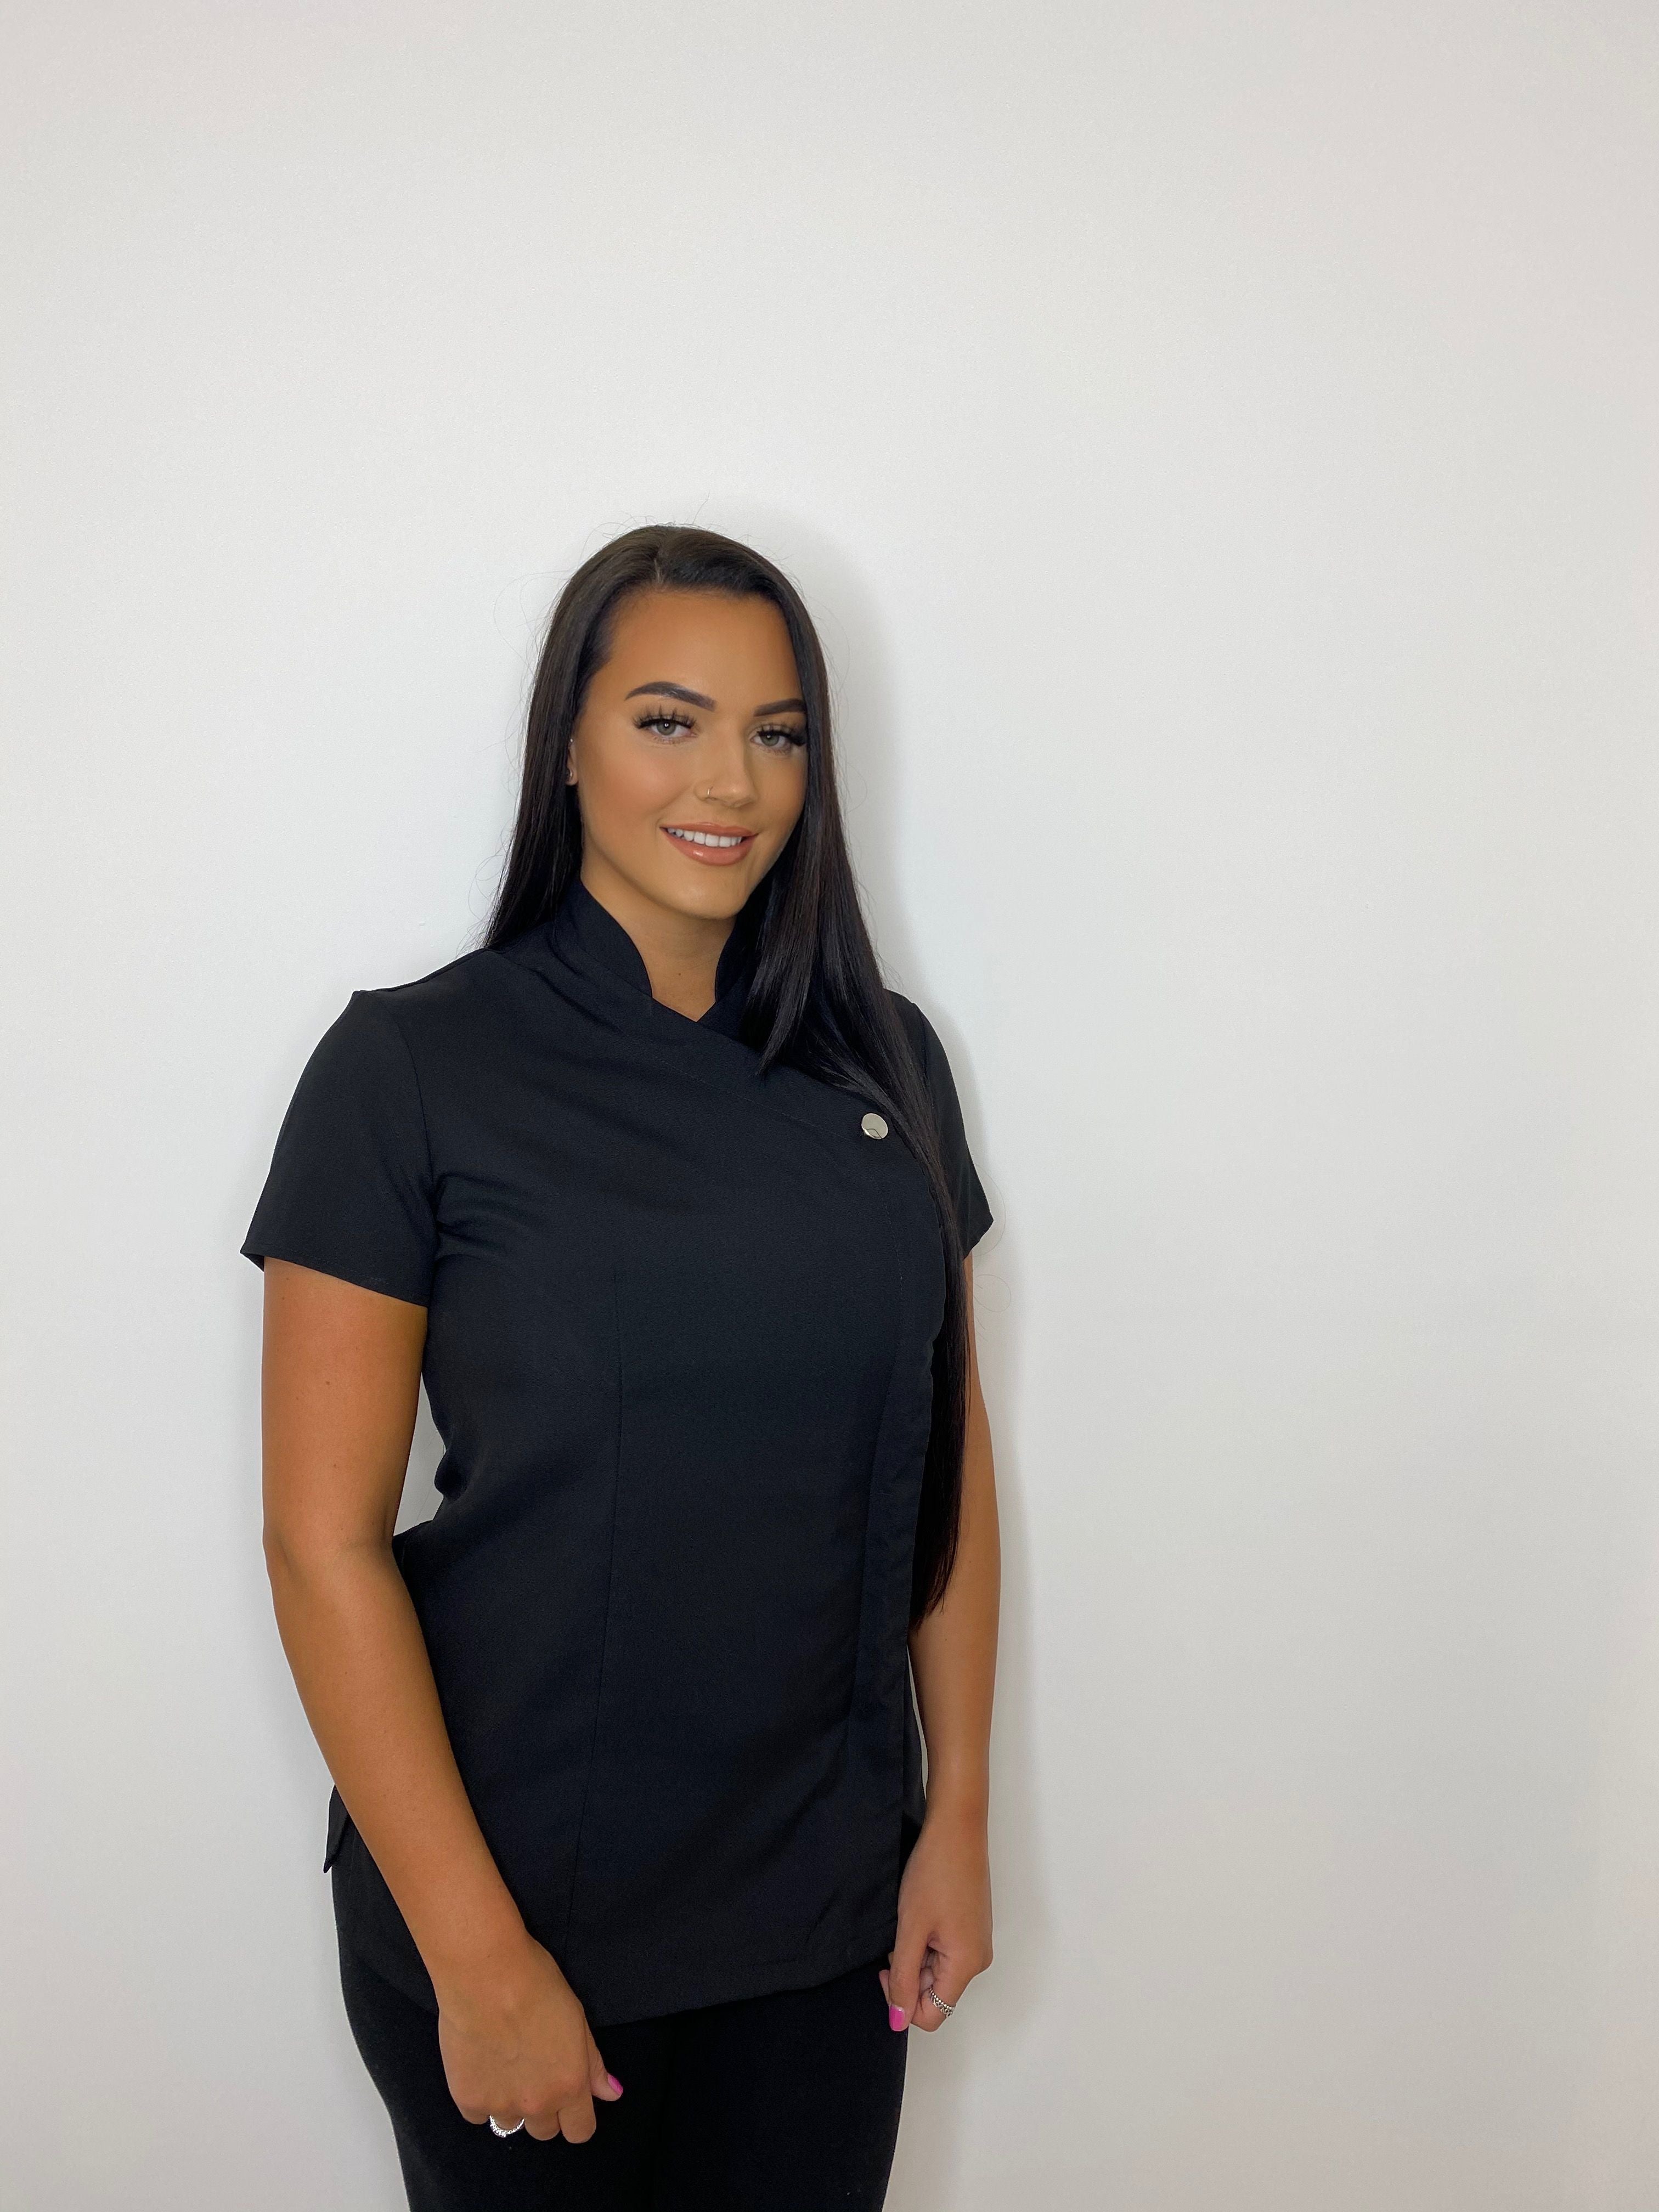 Tech of the Month - Meet Jessica - @superiorcosmetics